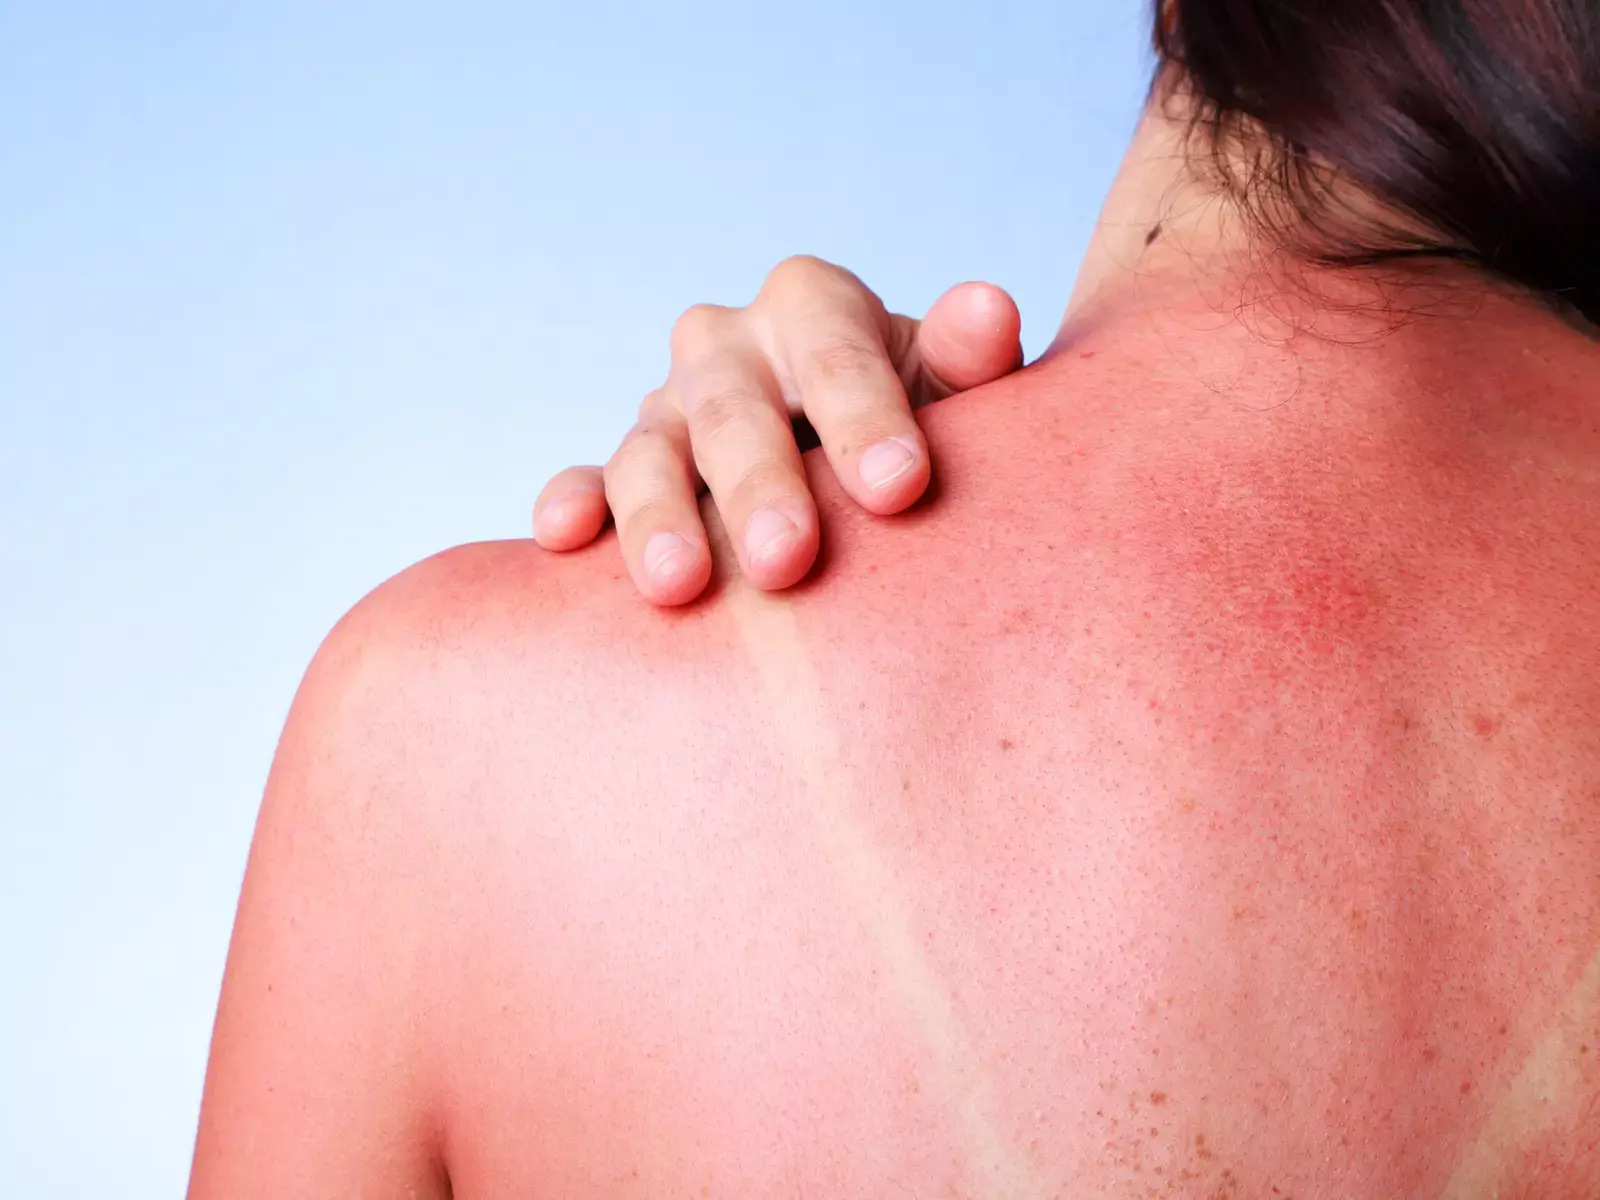 Effective Home Remedies for Sunburn to Try